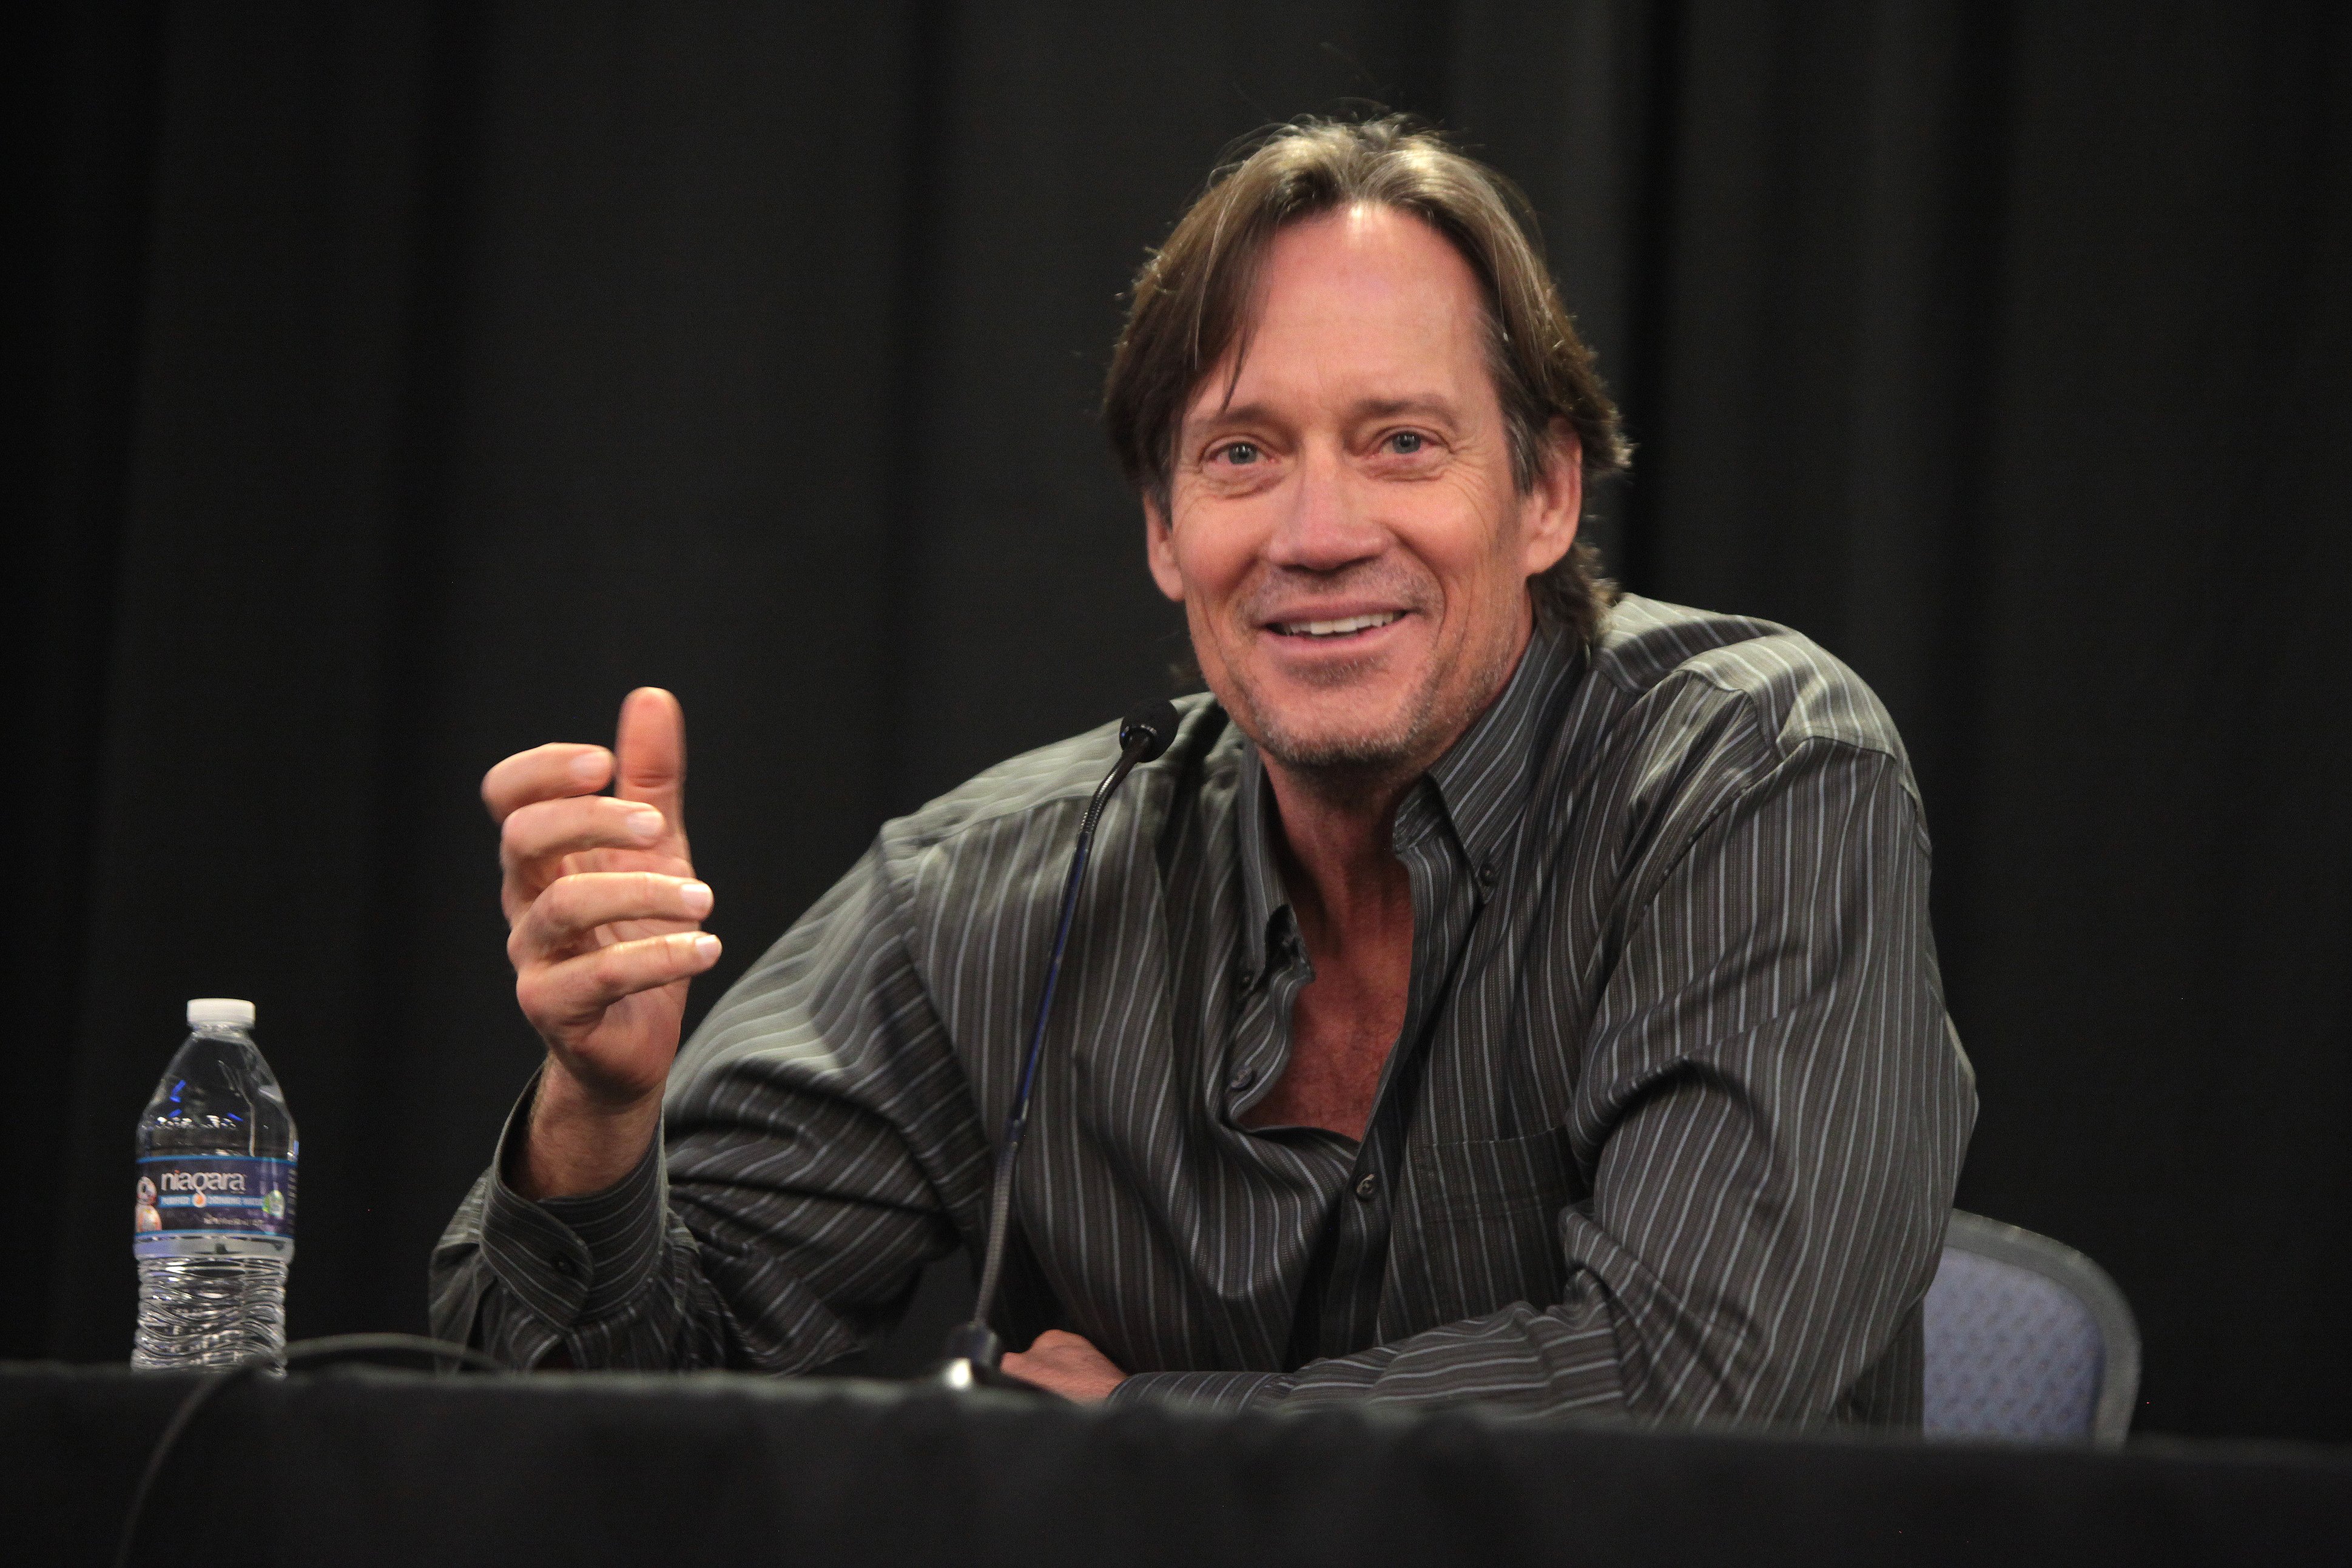 Kevin Sorbo at the 2015 Phoenix Comicon Fan Fest. | Source: Wikimedia Commons